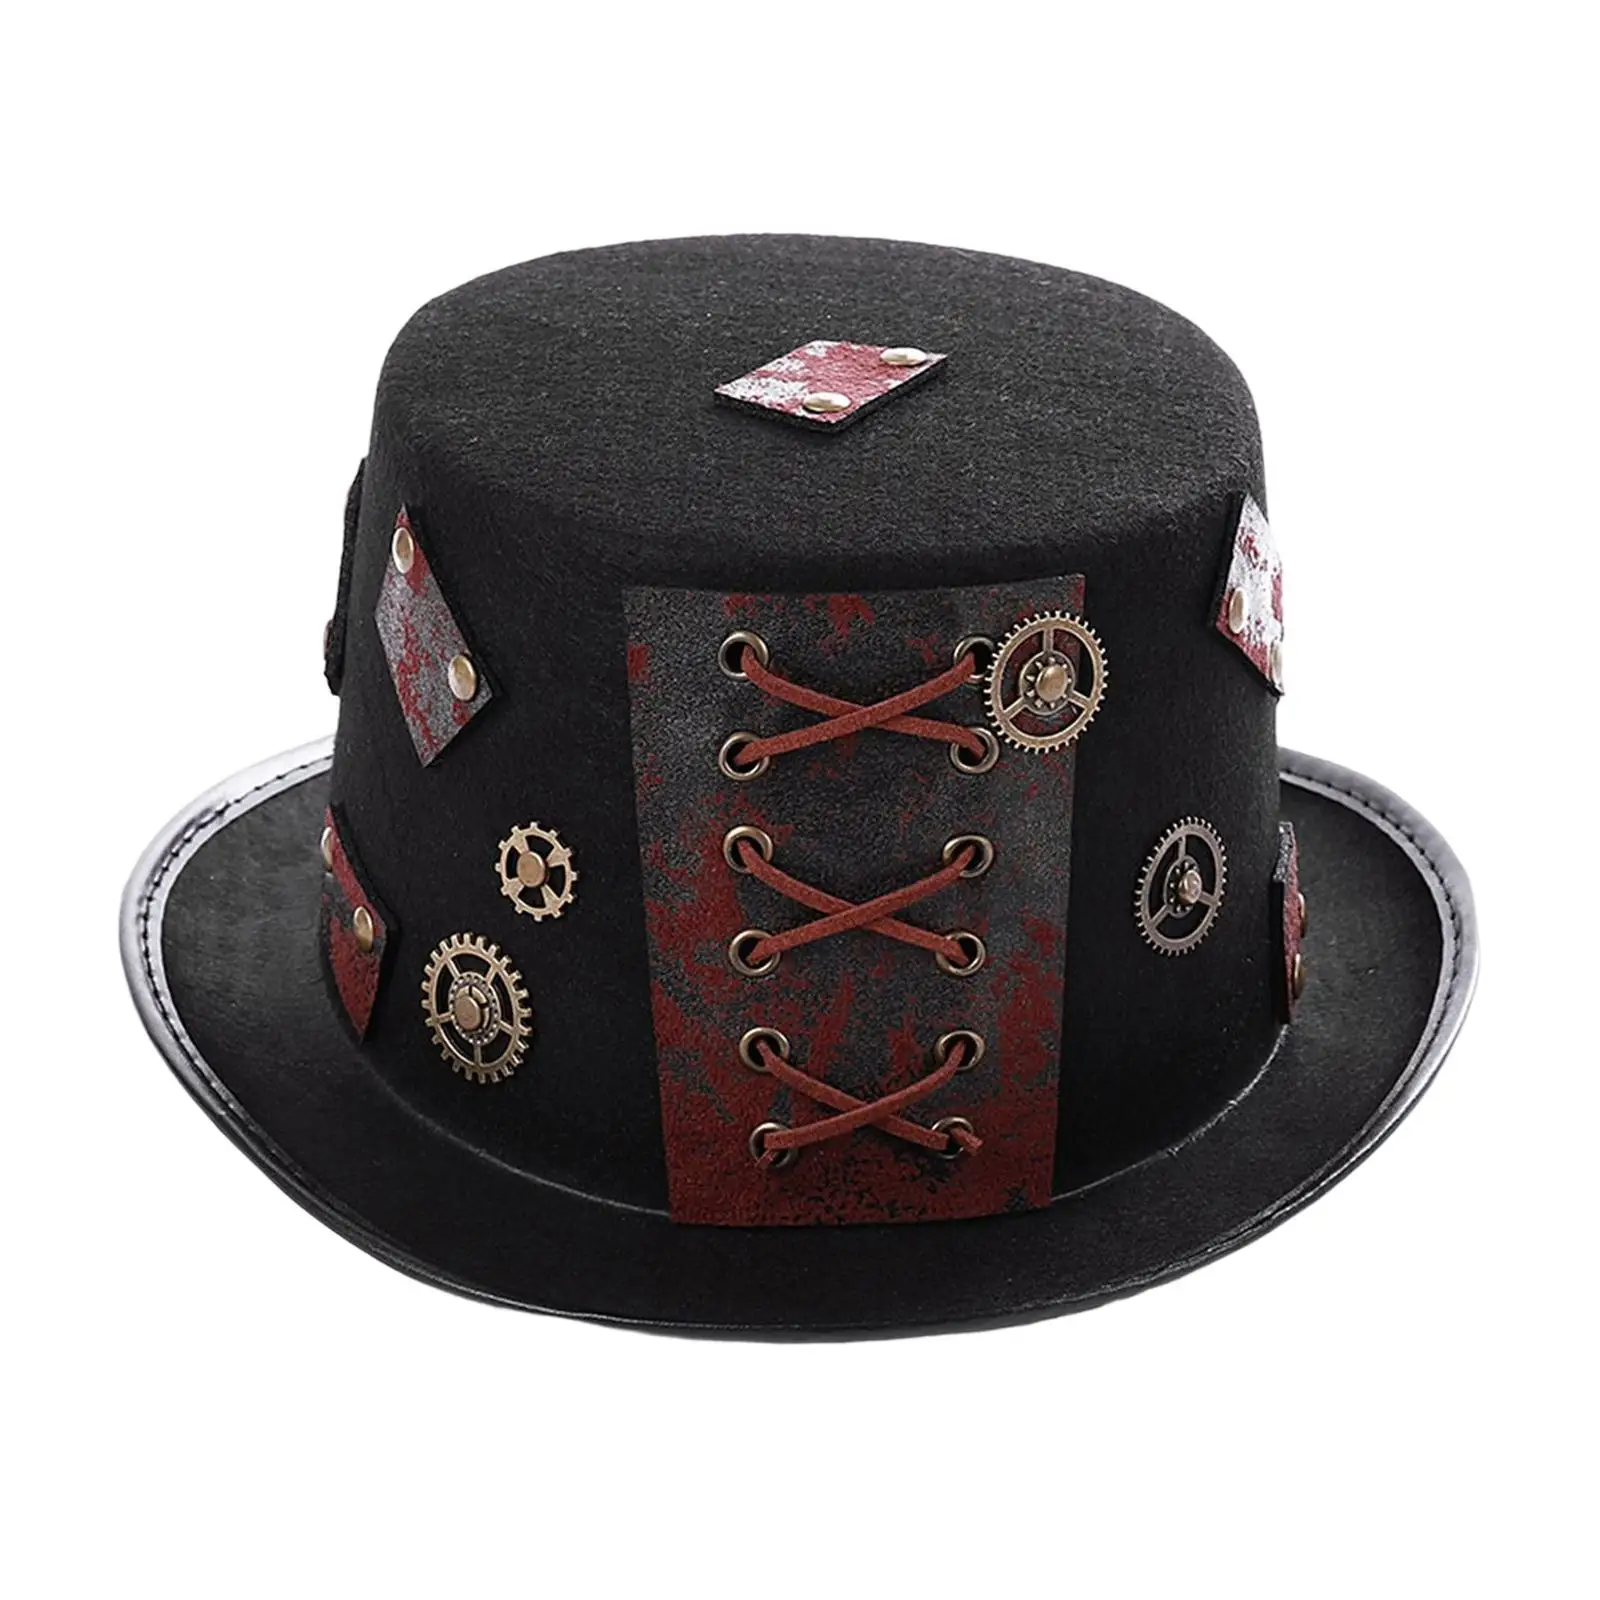  Steampunk Top Hat with String Gear Cosplay Costume Hat, Accessories Masquerade Costume Party for  Carnival Elegant